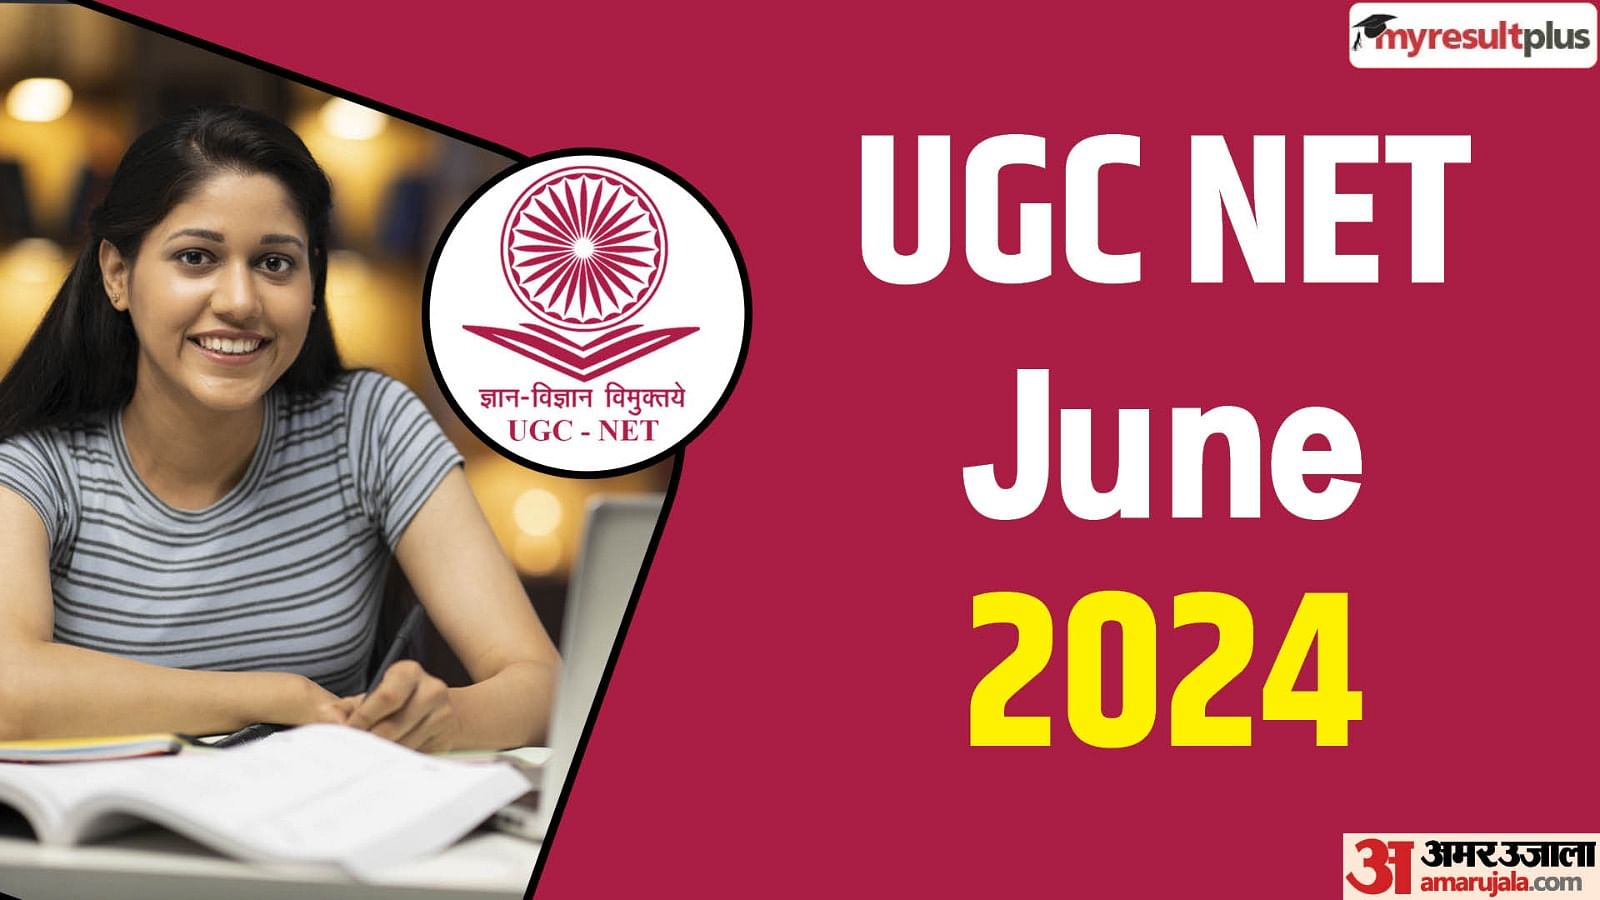 UGC NET 2024 registration window now open, Apply today at ugcnet.nta.ac.in and read all details here